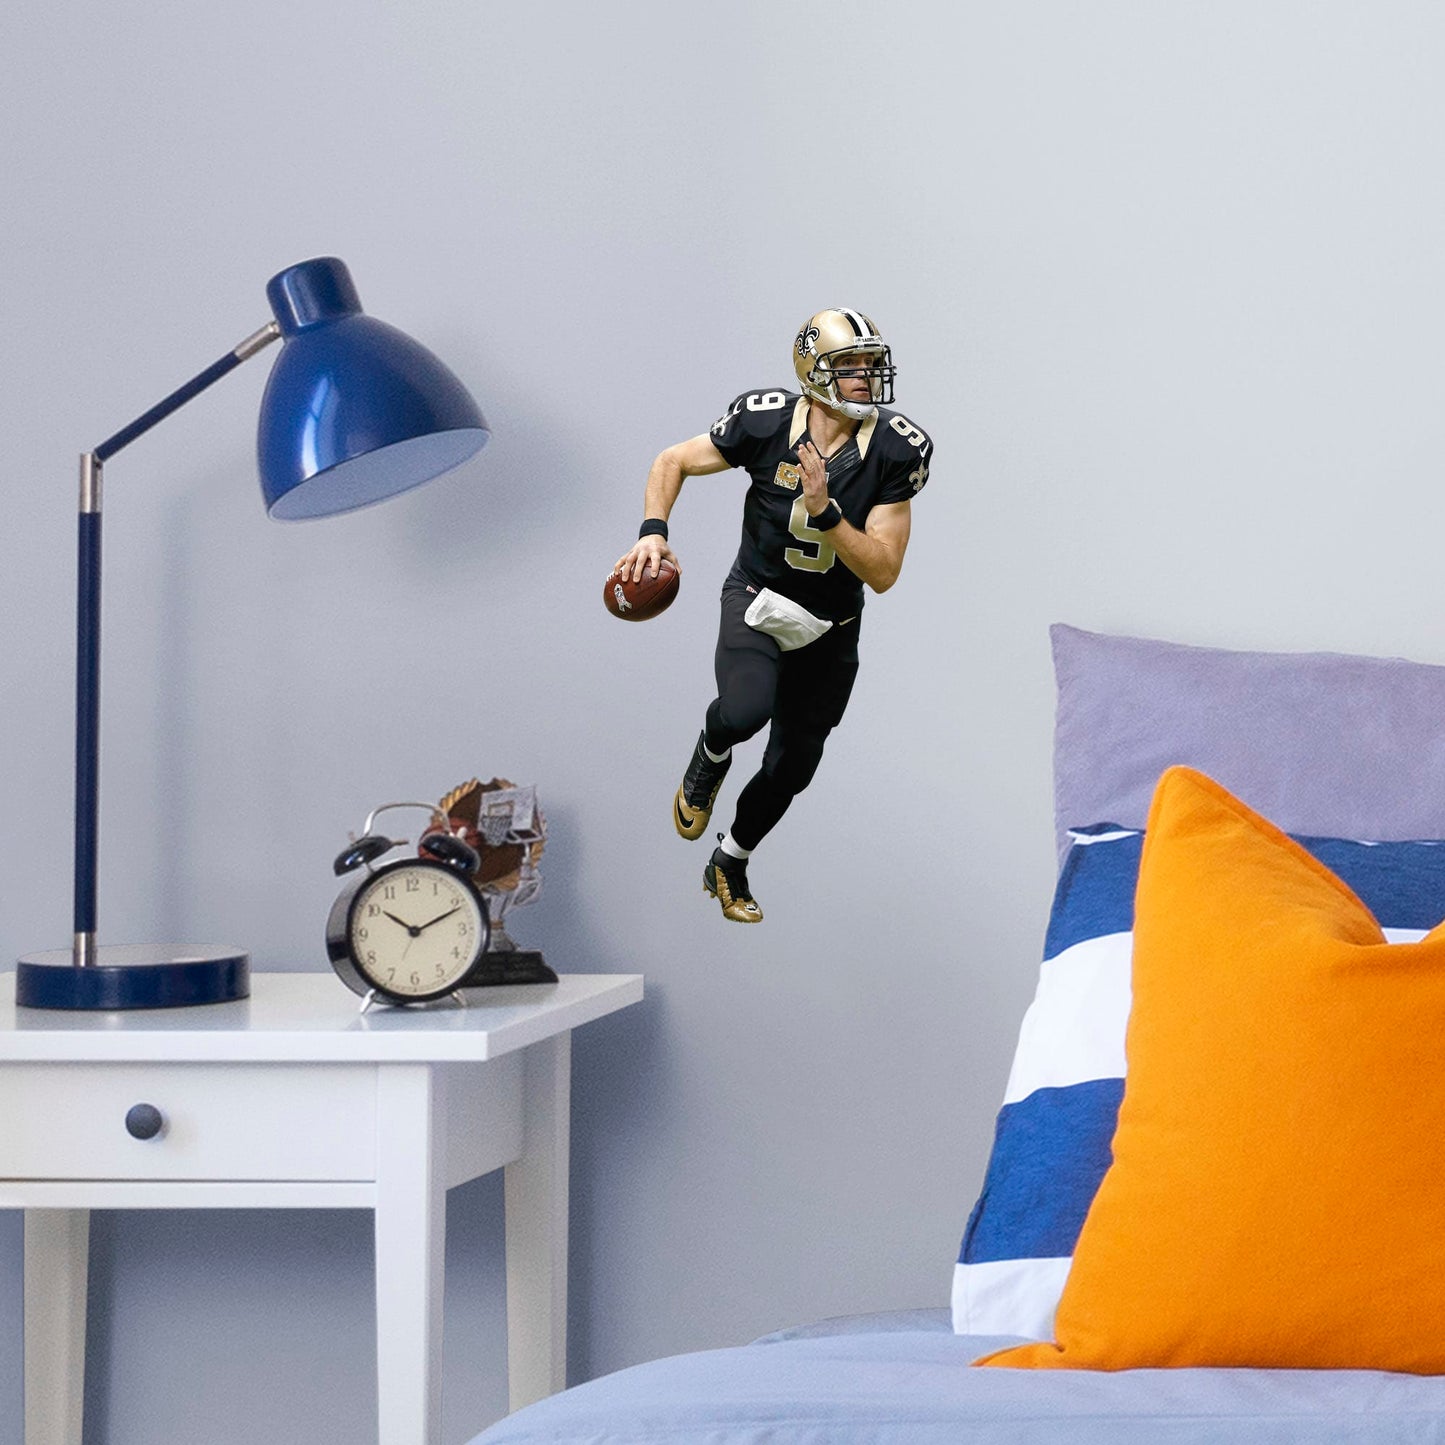 Large Athlete + 1 Decals (7"W x 17"H) Super Bowl MVP, NFL Sportsman of the Year, and perennial fan favorite Drew Brees hustles across your man cave wall with this durable vinyl wall decal. Showcasing the Saints' signature black and old gold with the home game uniform, this decal turns your sports bar, bedroom, or dorm room into your personal Superdome. The reusable, high quality vinyl won't damage walls, making it the perfect choice if you need to take your Saints fandom on the road.